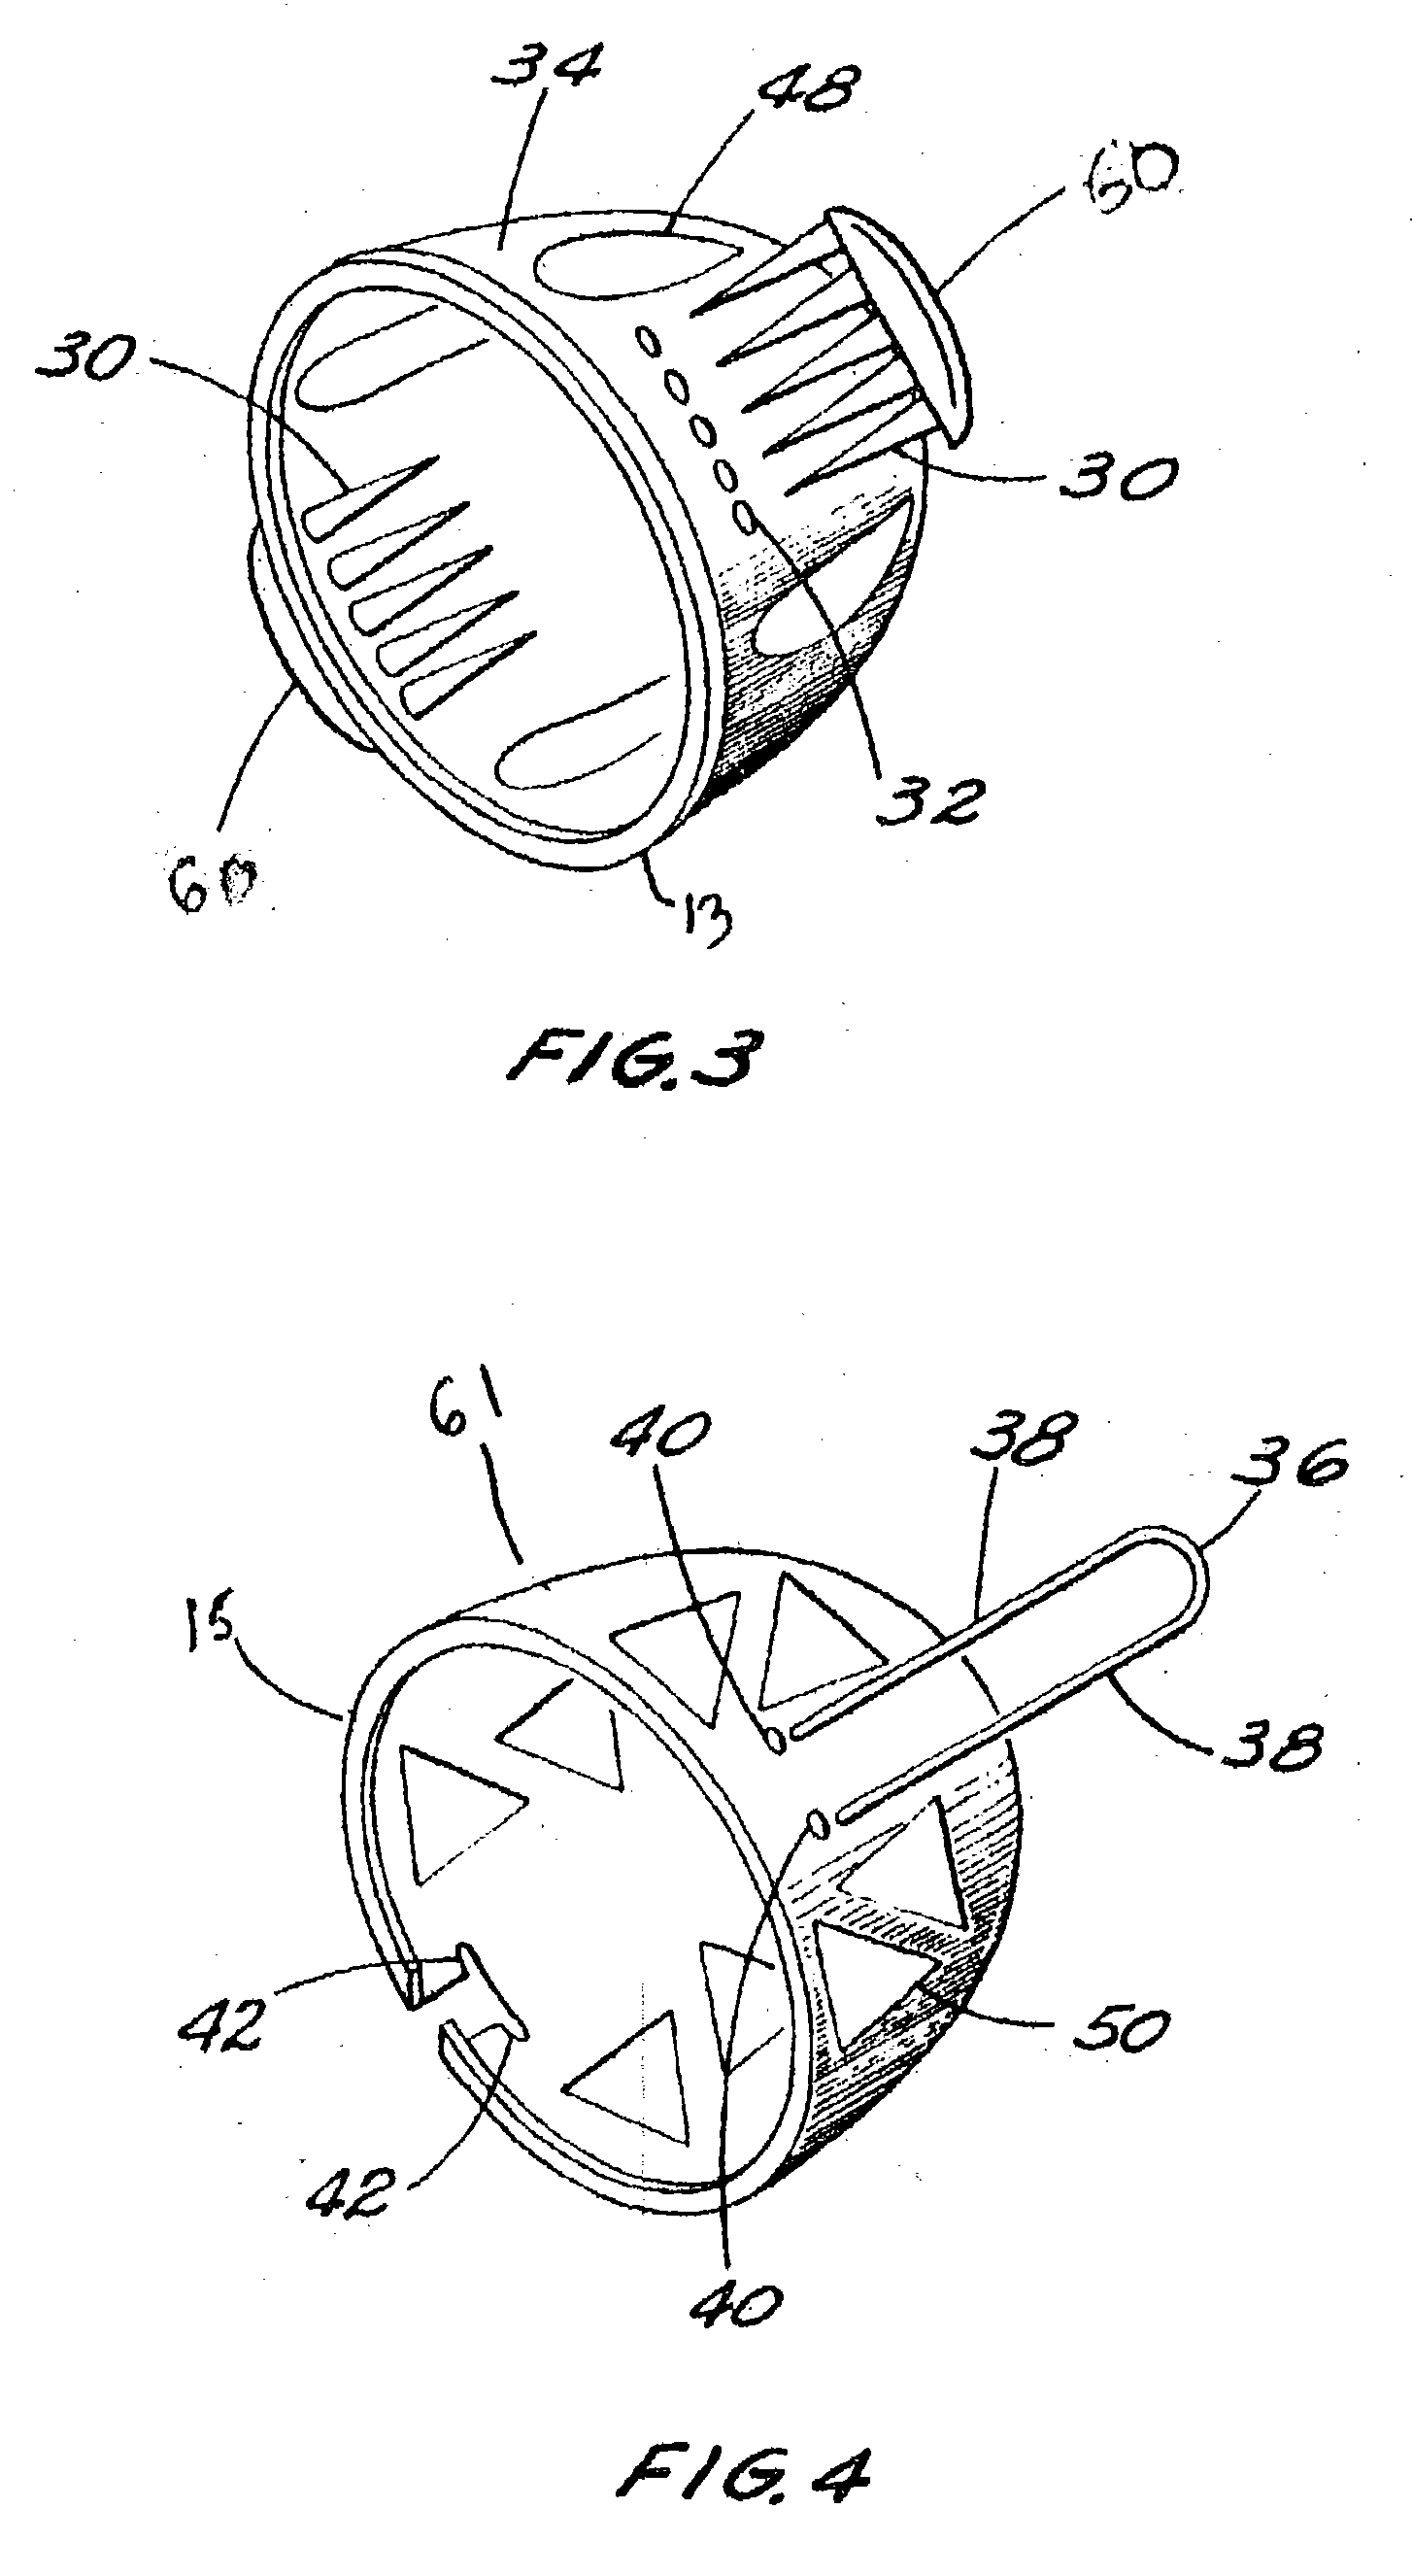 Hair holding and containment device